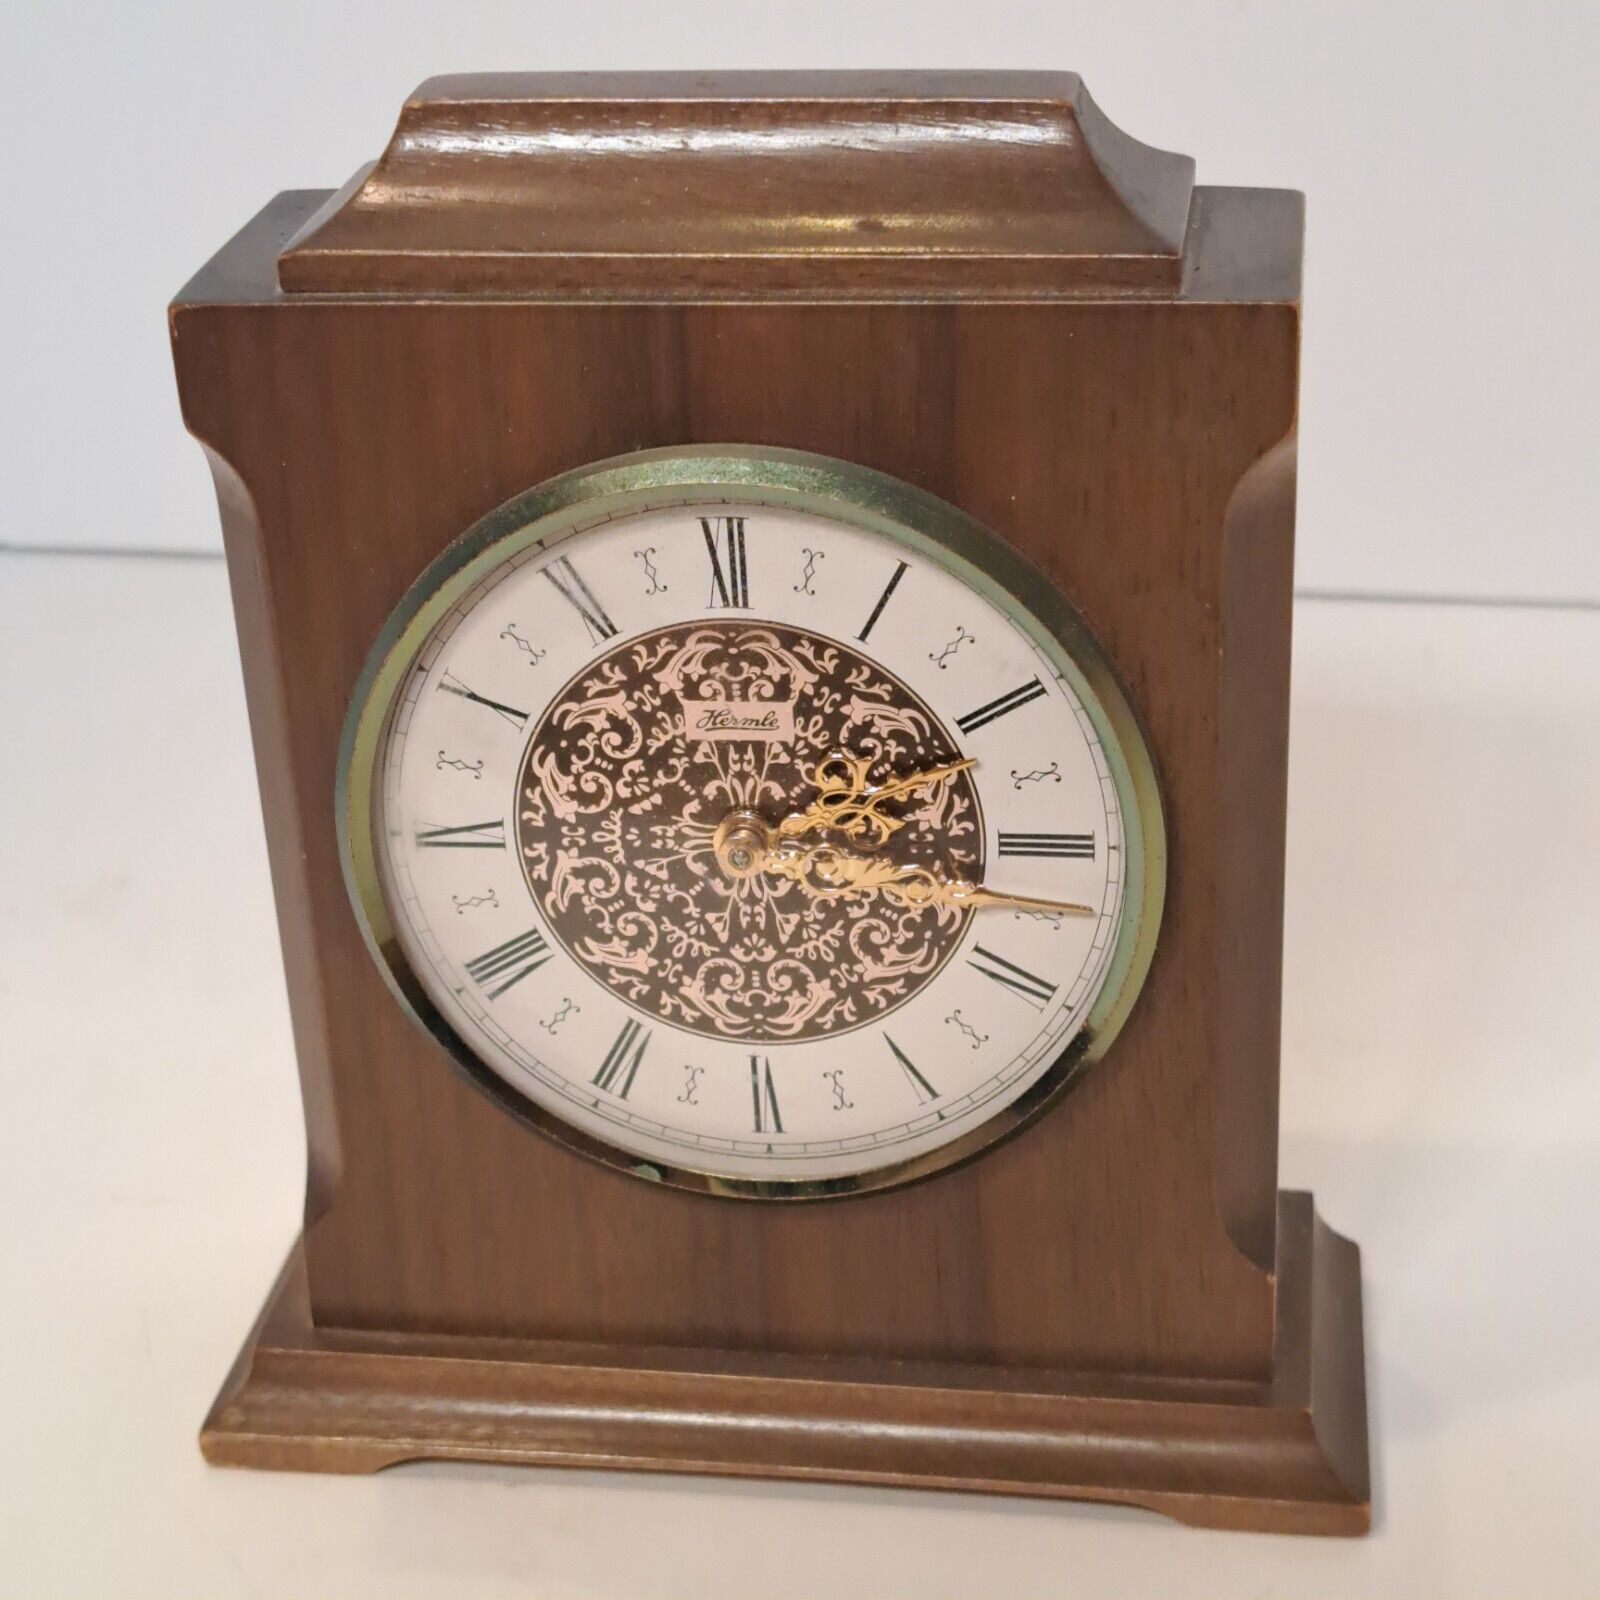 Small Hermle Desk Clock -  Display only or for parts (not in working order)